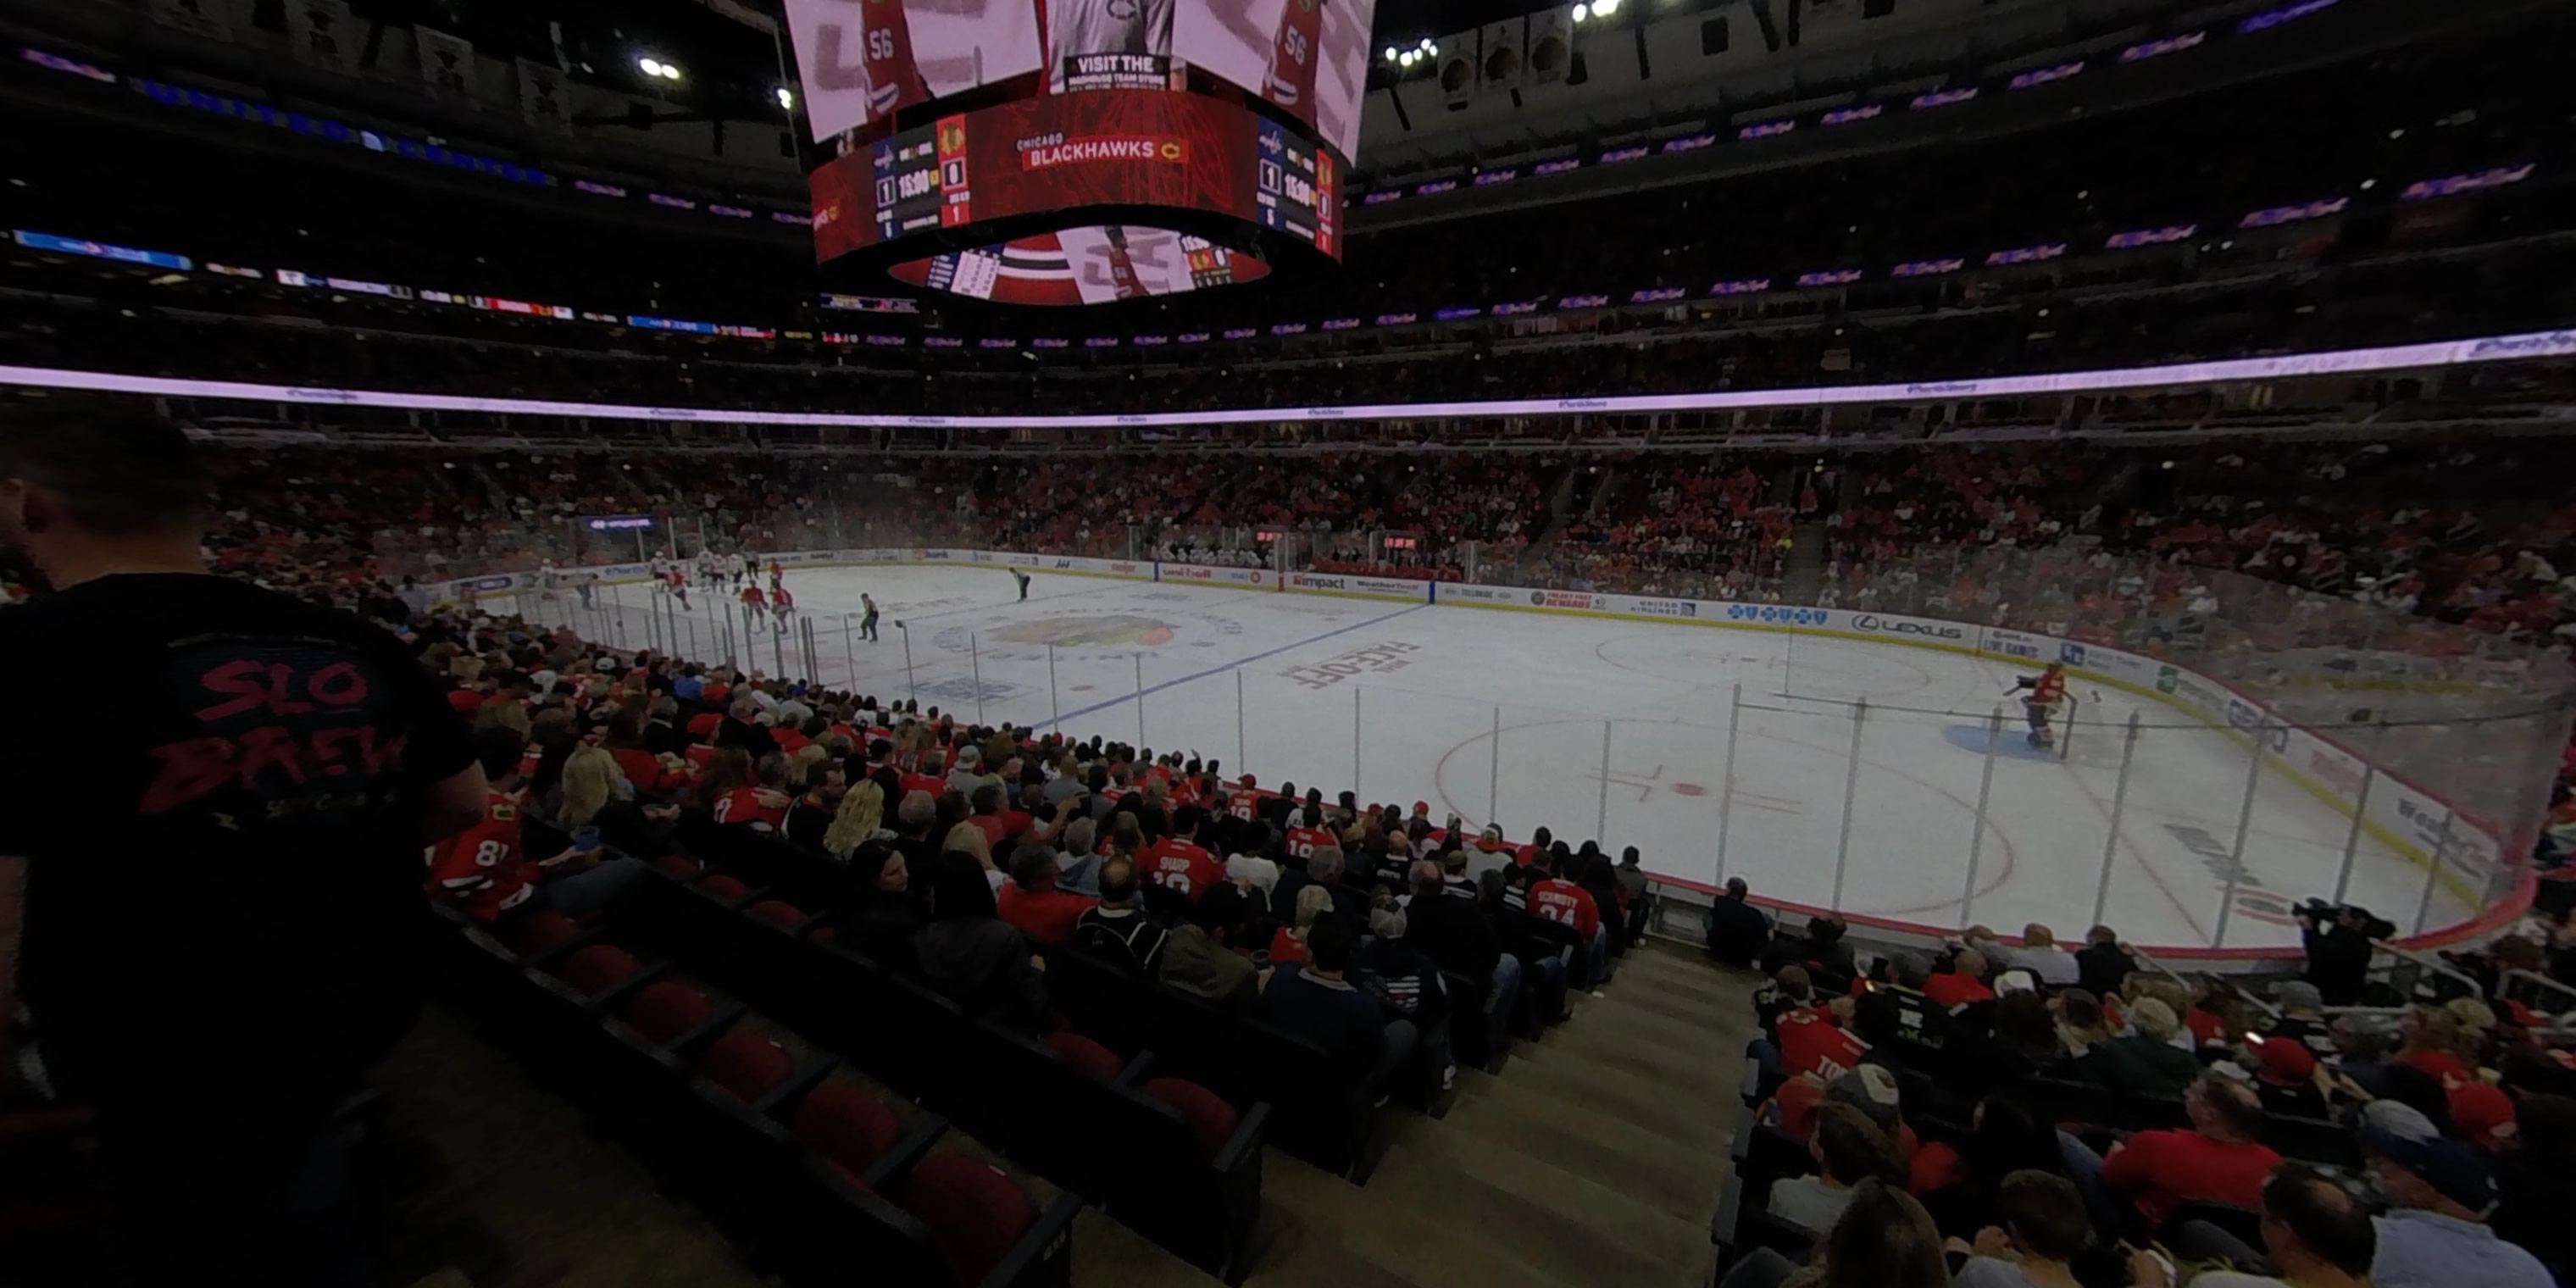 section 109 panoramic seat view  for hockey - united center